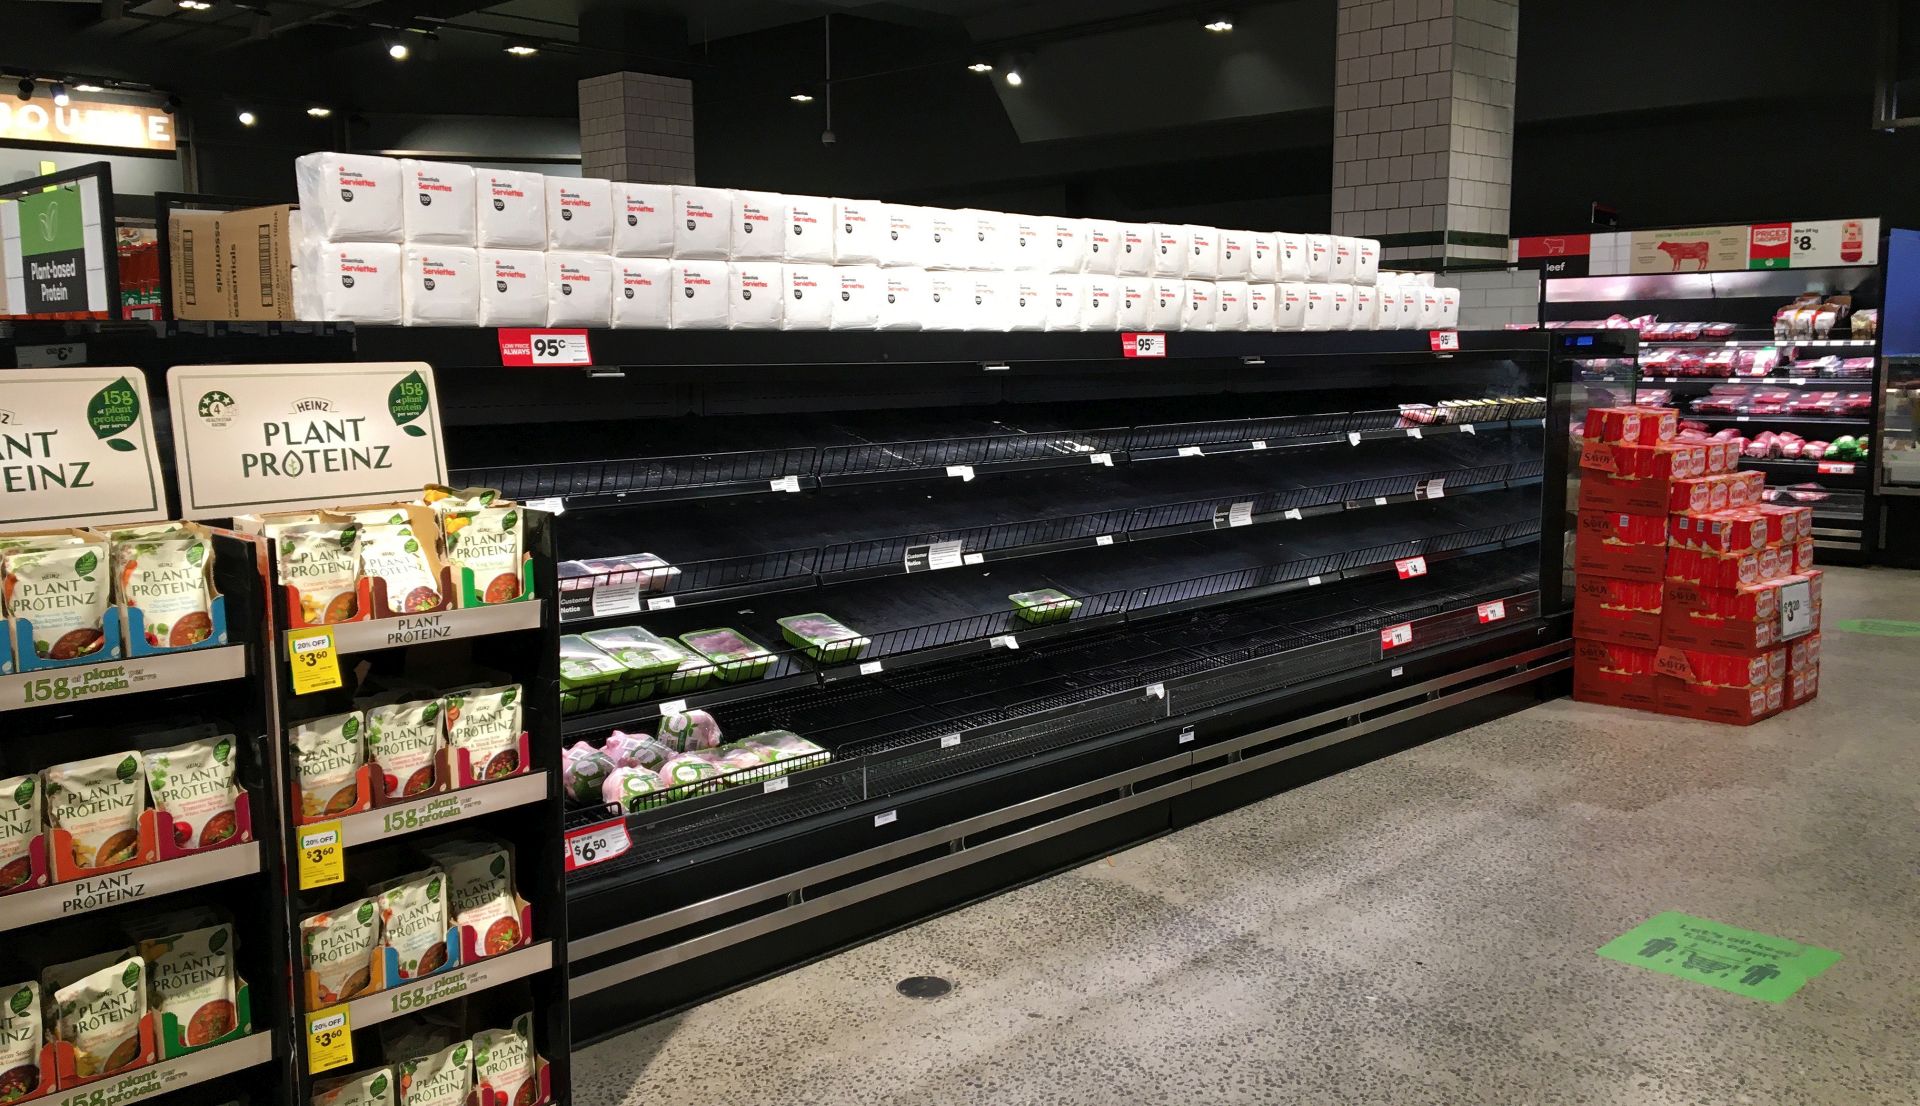 epa08584652 Empty shelves in a poultry section of a Woolworths supermarket in Melbourne, Australia, 05 August 2020. Shortages of meat products is occurring throughout supermarkets after a spike in coronavirus infections in the meat processing industry and an increase in panic buying after a stage four lockdown was announced.  EPA/JAMES ROSS AUSTRALIA AND NEW ZEALAND OUT